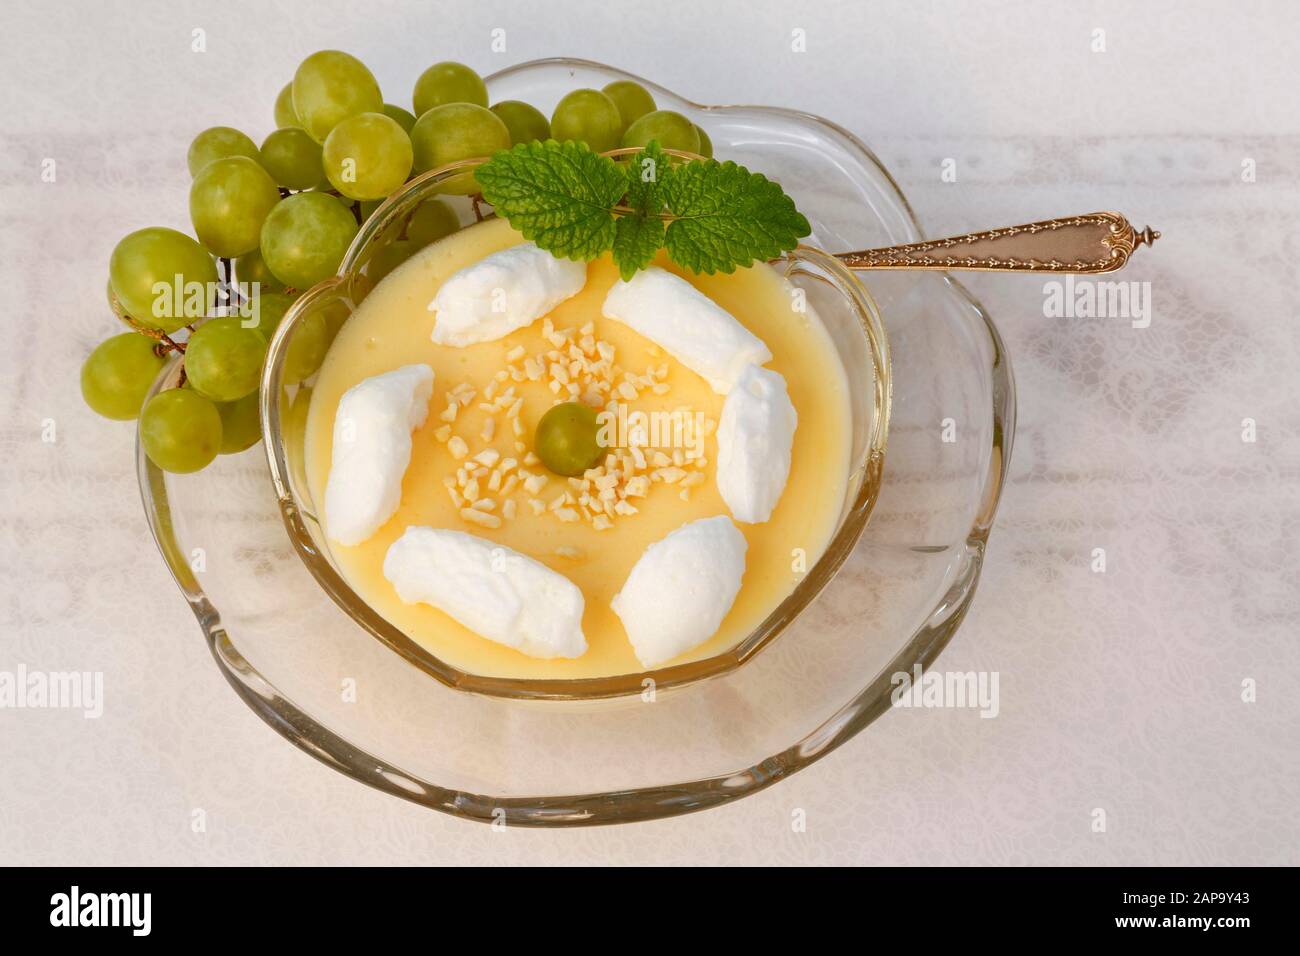 Dessert, wine cream with beaten egg white and grapes in dessert bowl, Germany Stock Photo